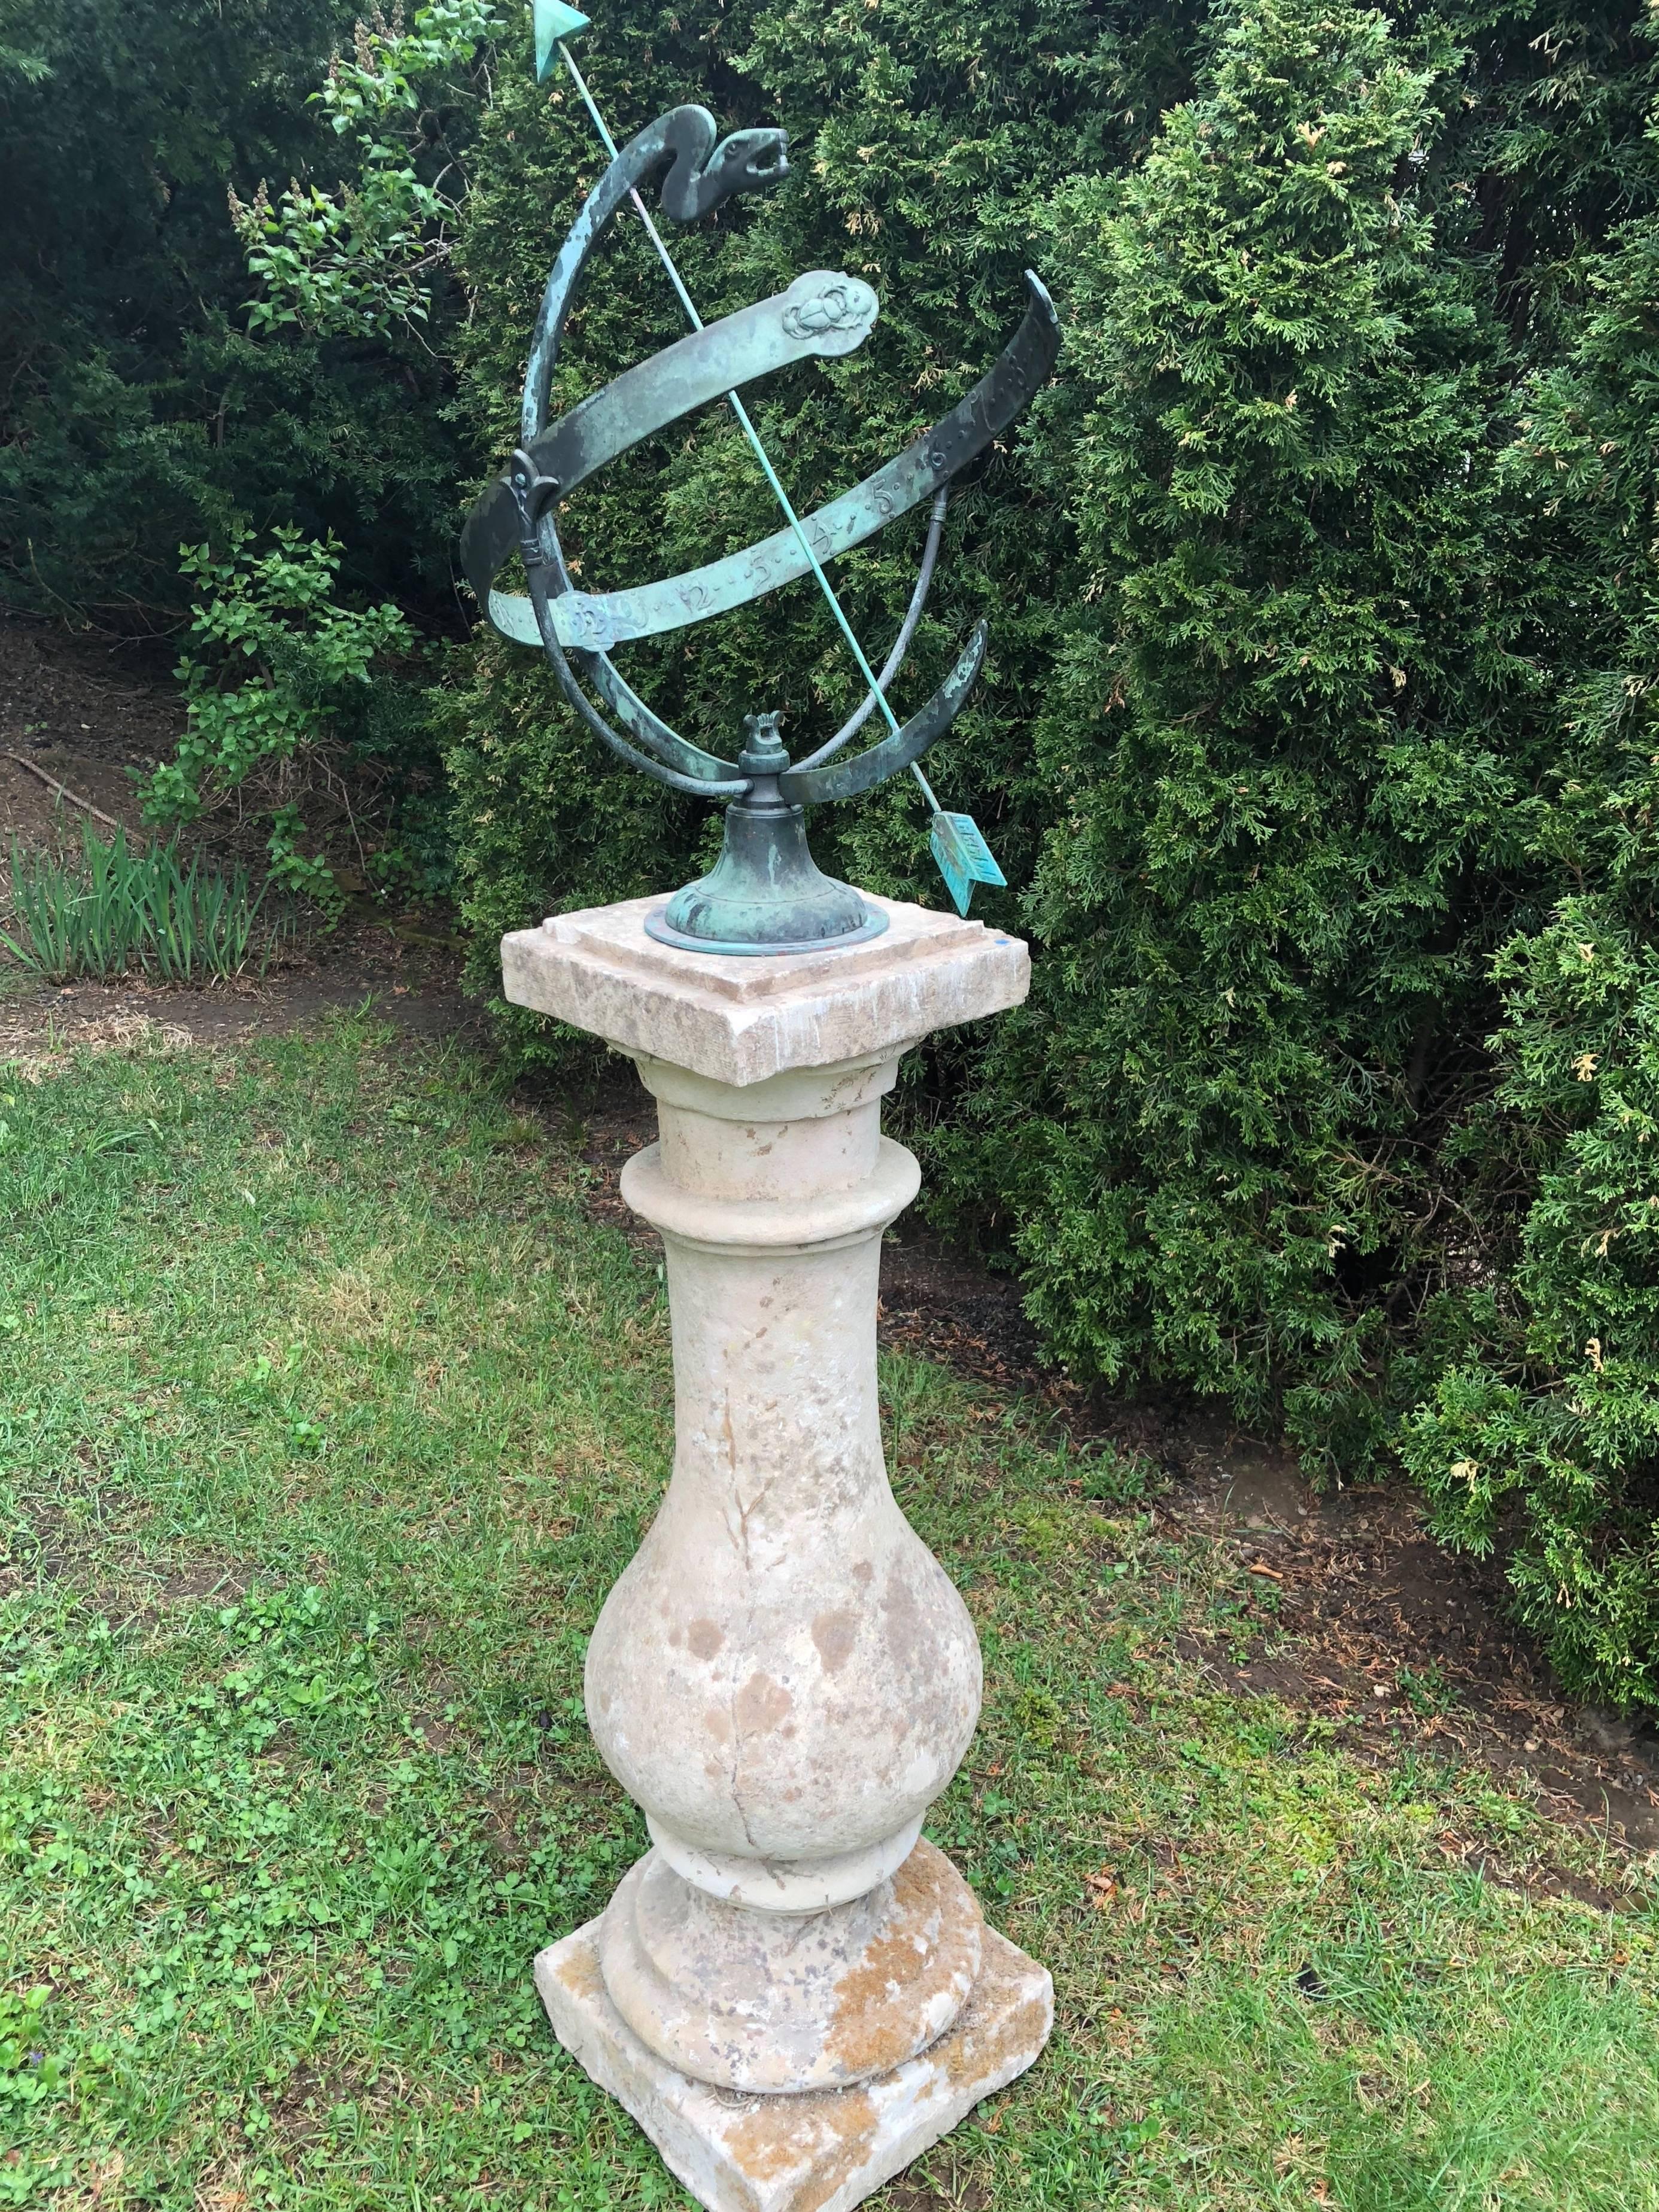 The rare form of this bronze serpent armillary, its large size and gorgeous natural verdigris patina make it a most desirable piece. The armillary features a fanged serpent, stunning bas relief hour numbers, and two beetle scarabs at the ends of the